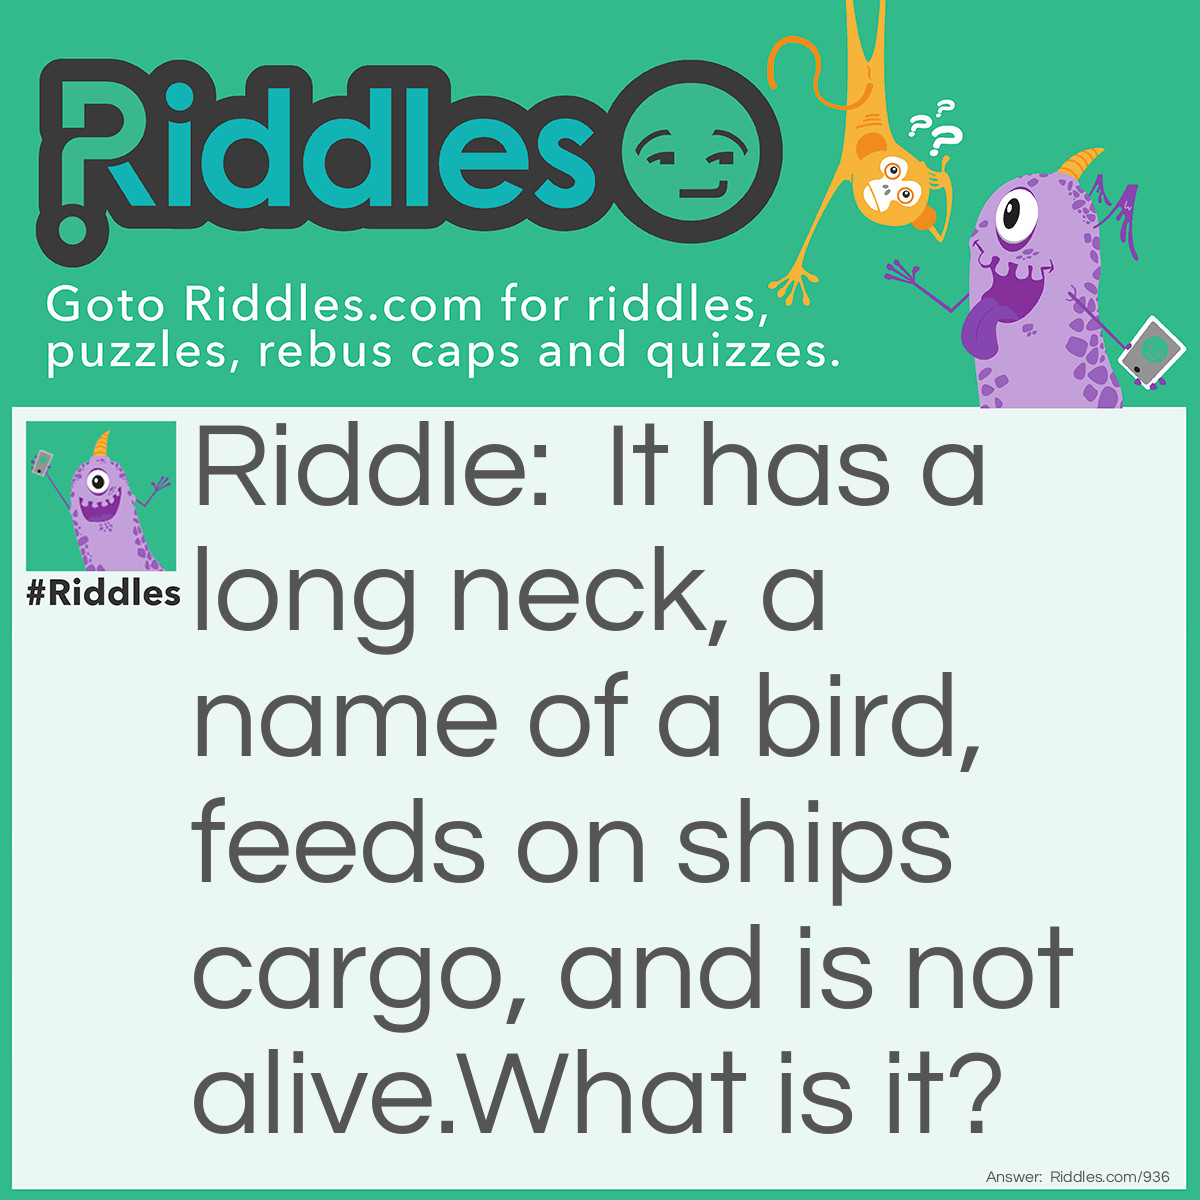 Riddle: It has a long neck, a name of a bird, feeds on ships cargo, and is not alive.
What is it? Answer: A crane.